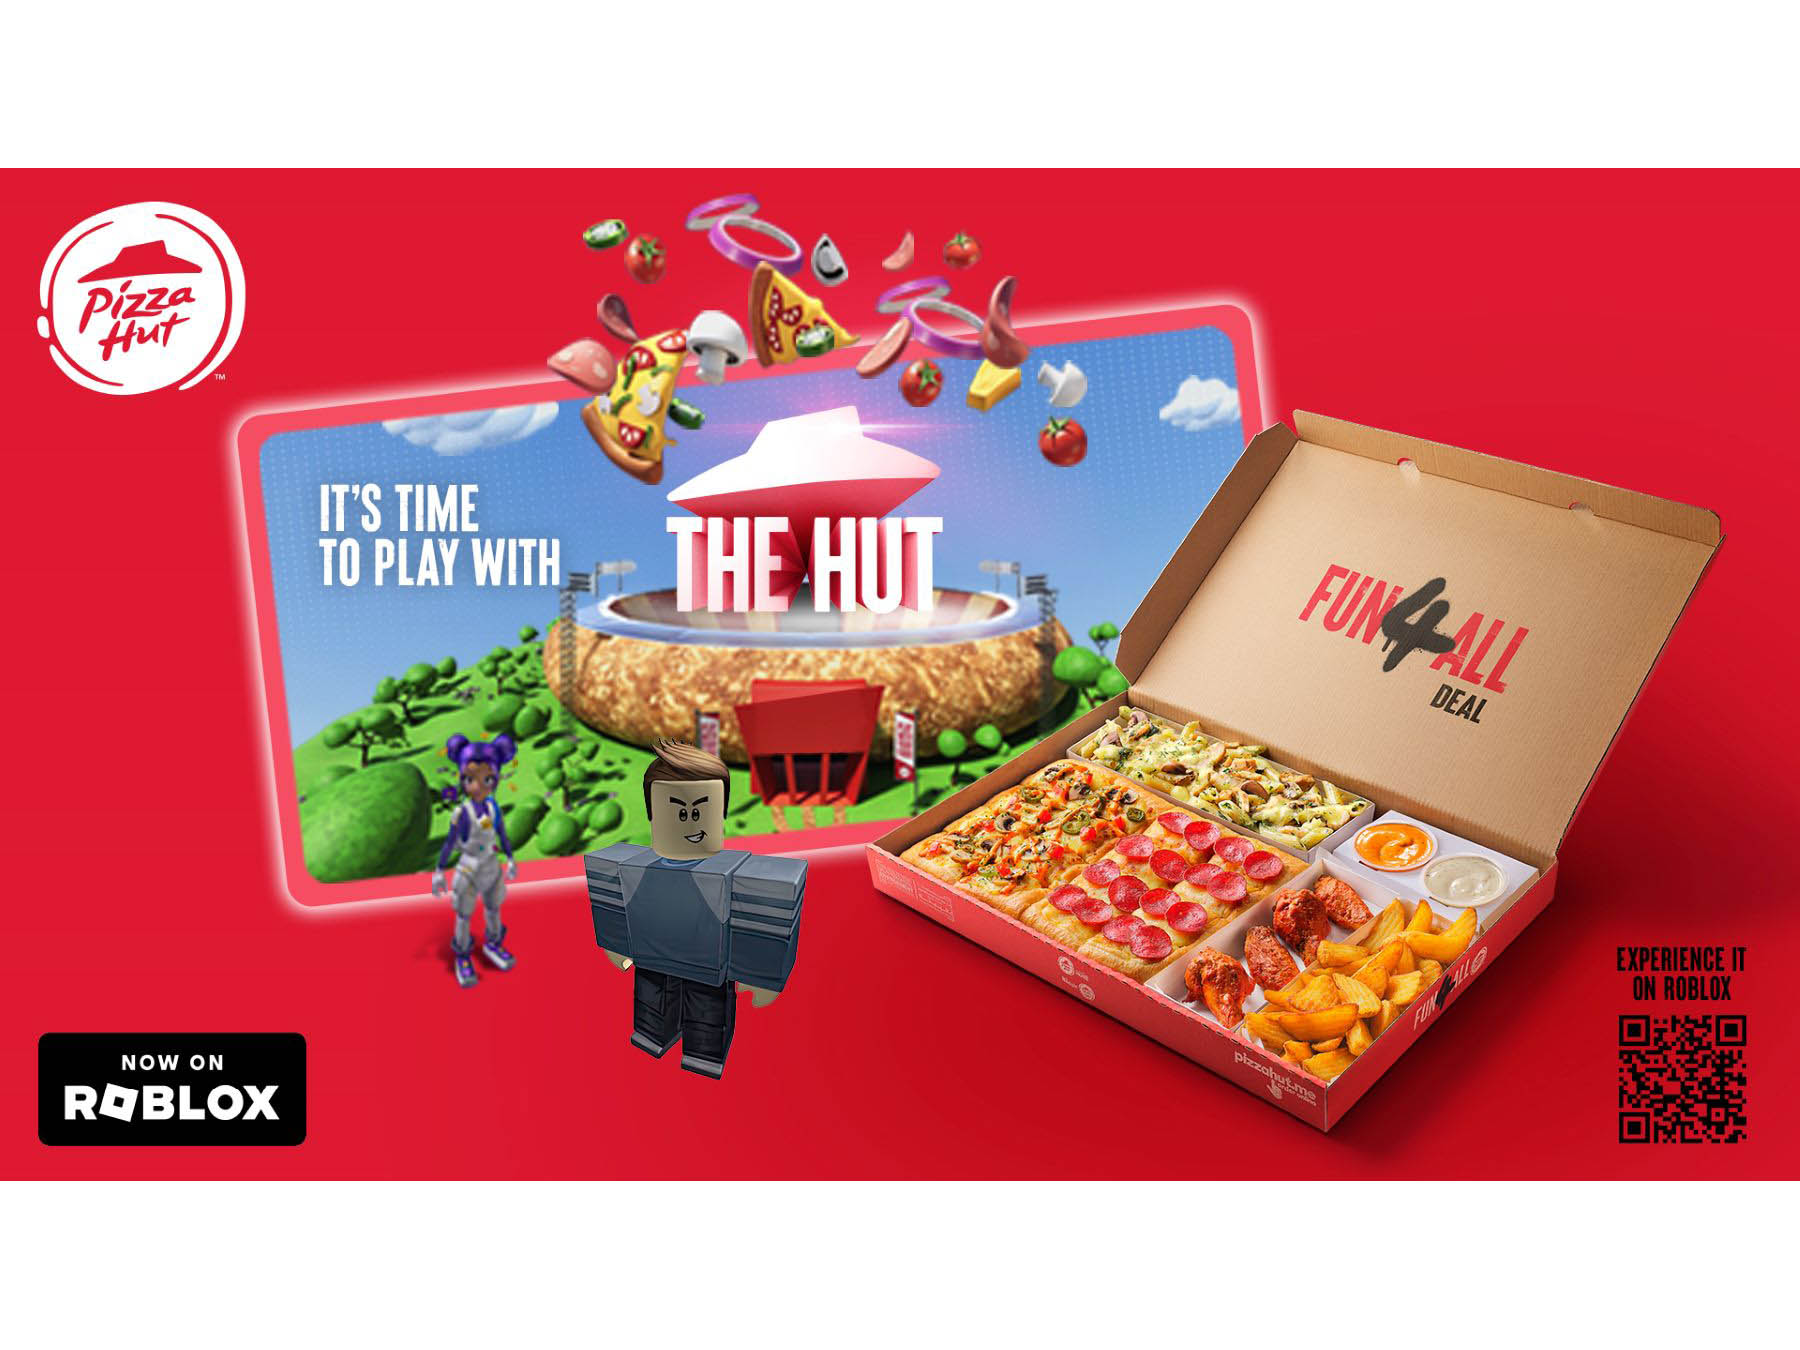 Pizza Hut makes its first step into the metaverse with the launch of The Hut on Roblox